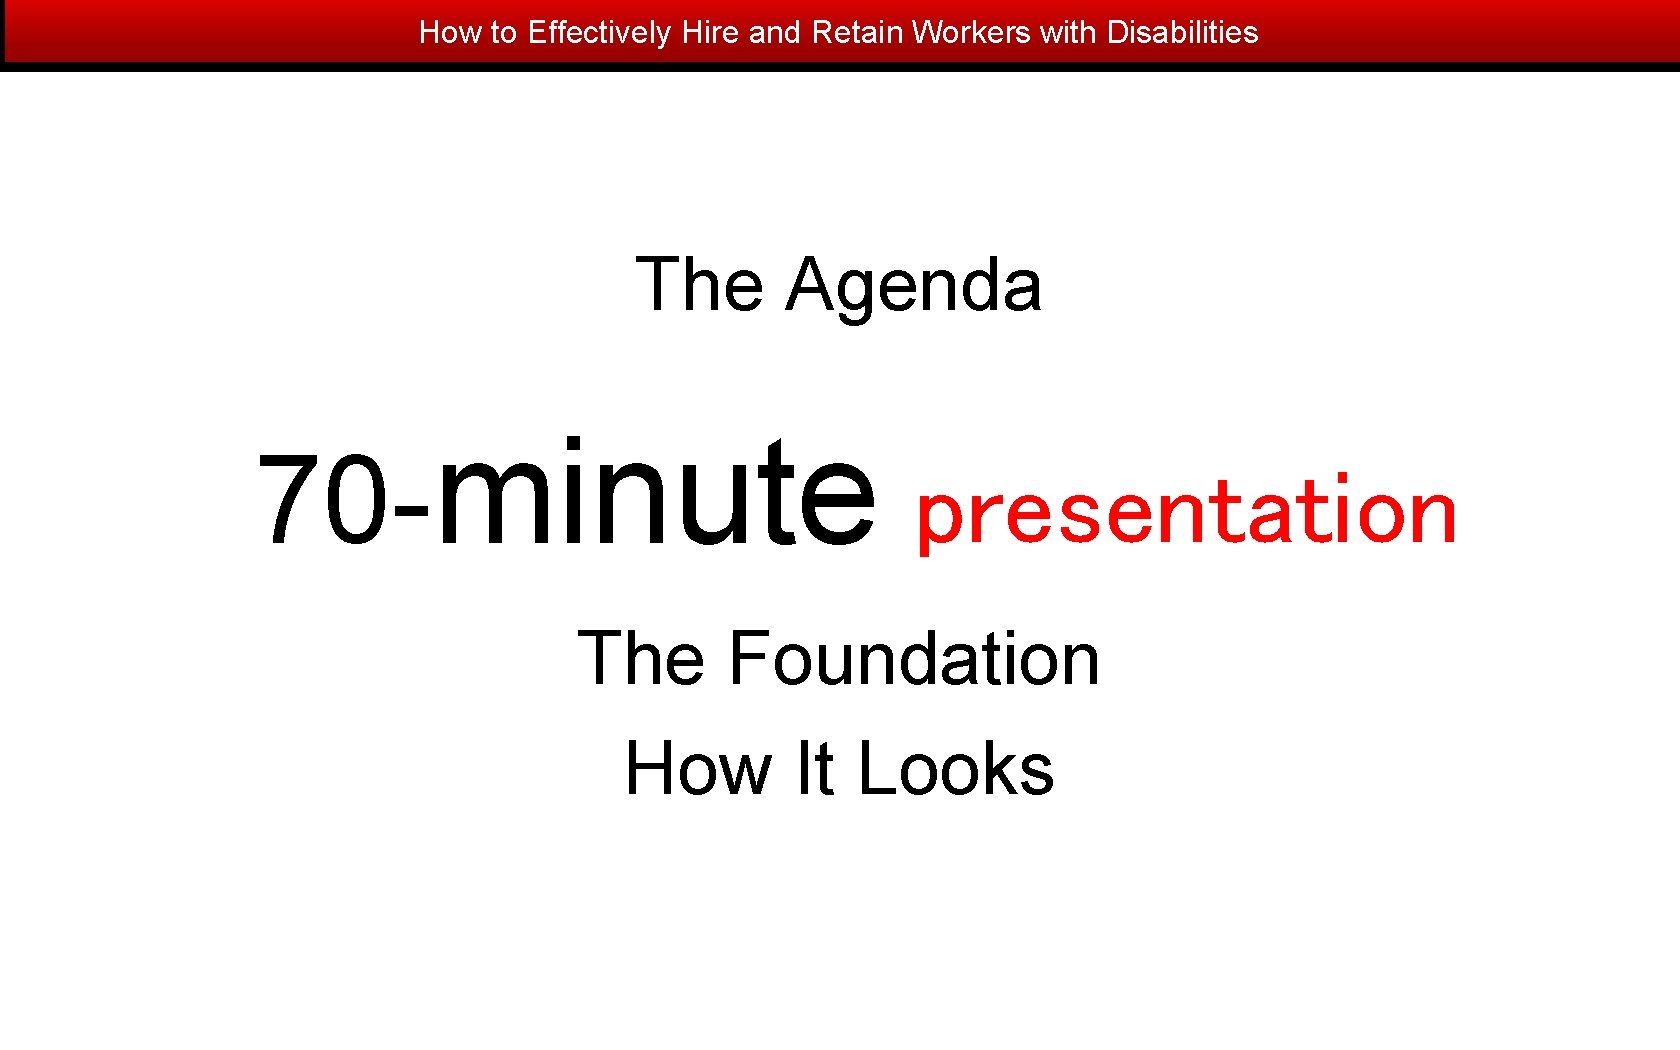 How to Effectively Hire and Retain Workers with Disabilities The Agenda 70 -minute presentation